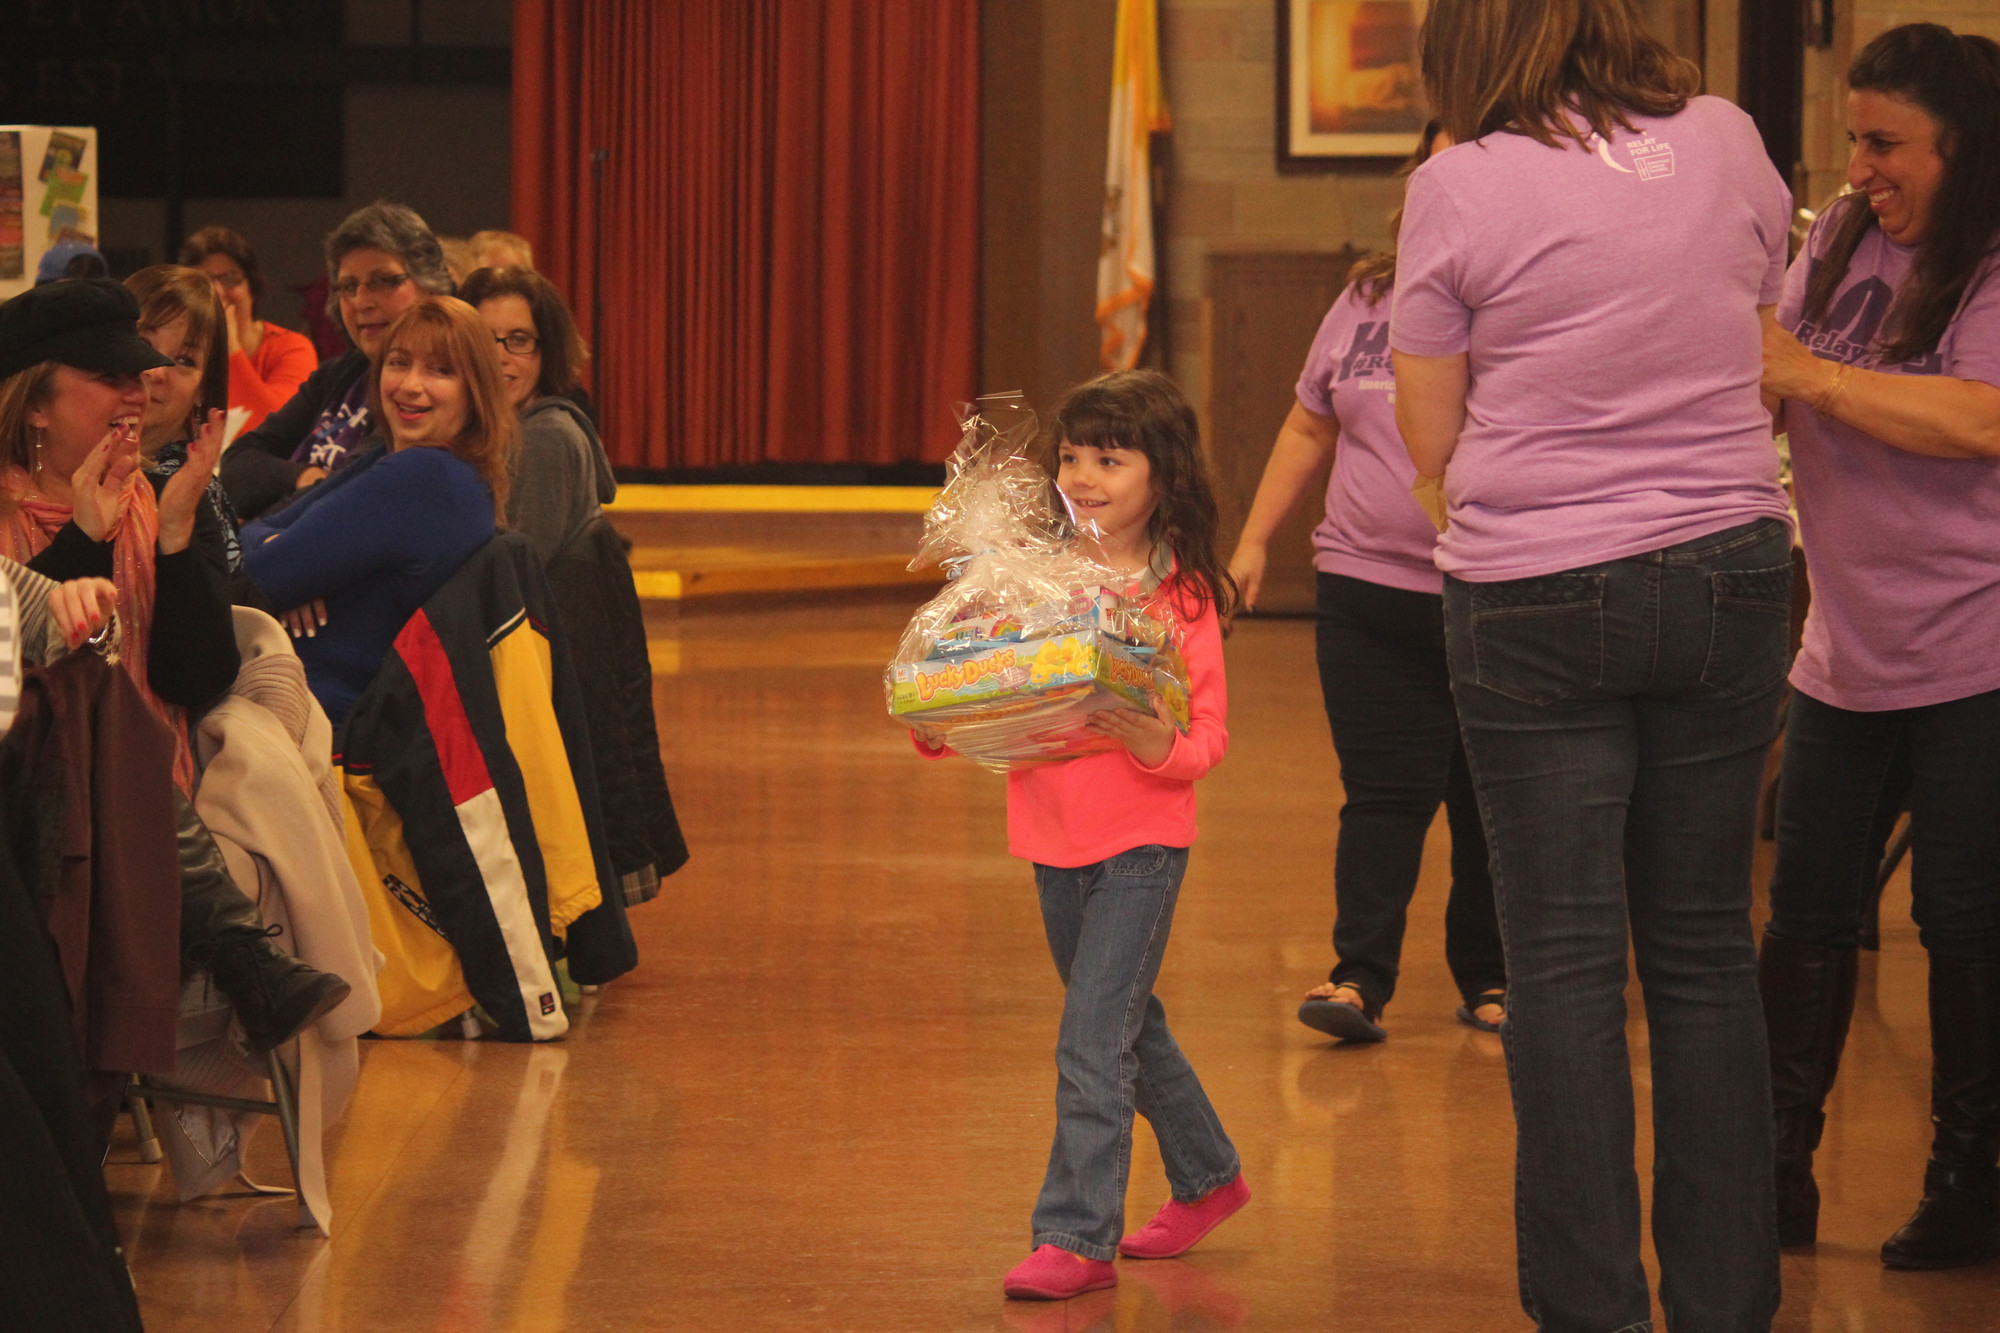 Leah Moran, 5, was the proud winner of one of more than 60 raffle baskets.